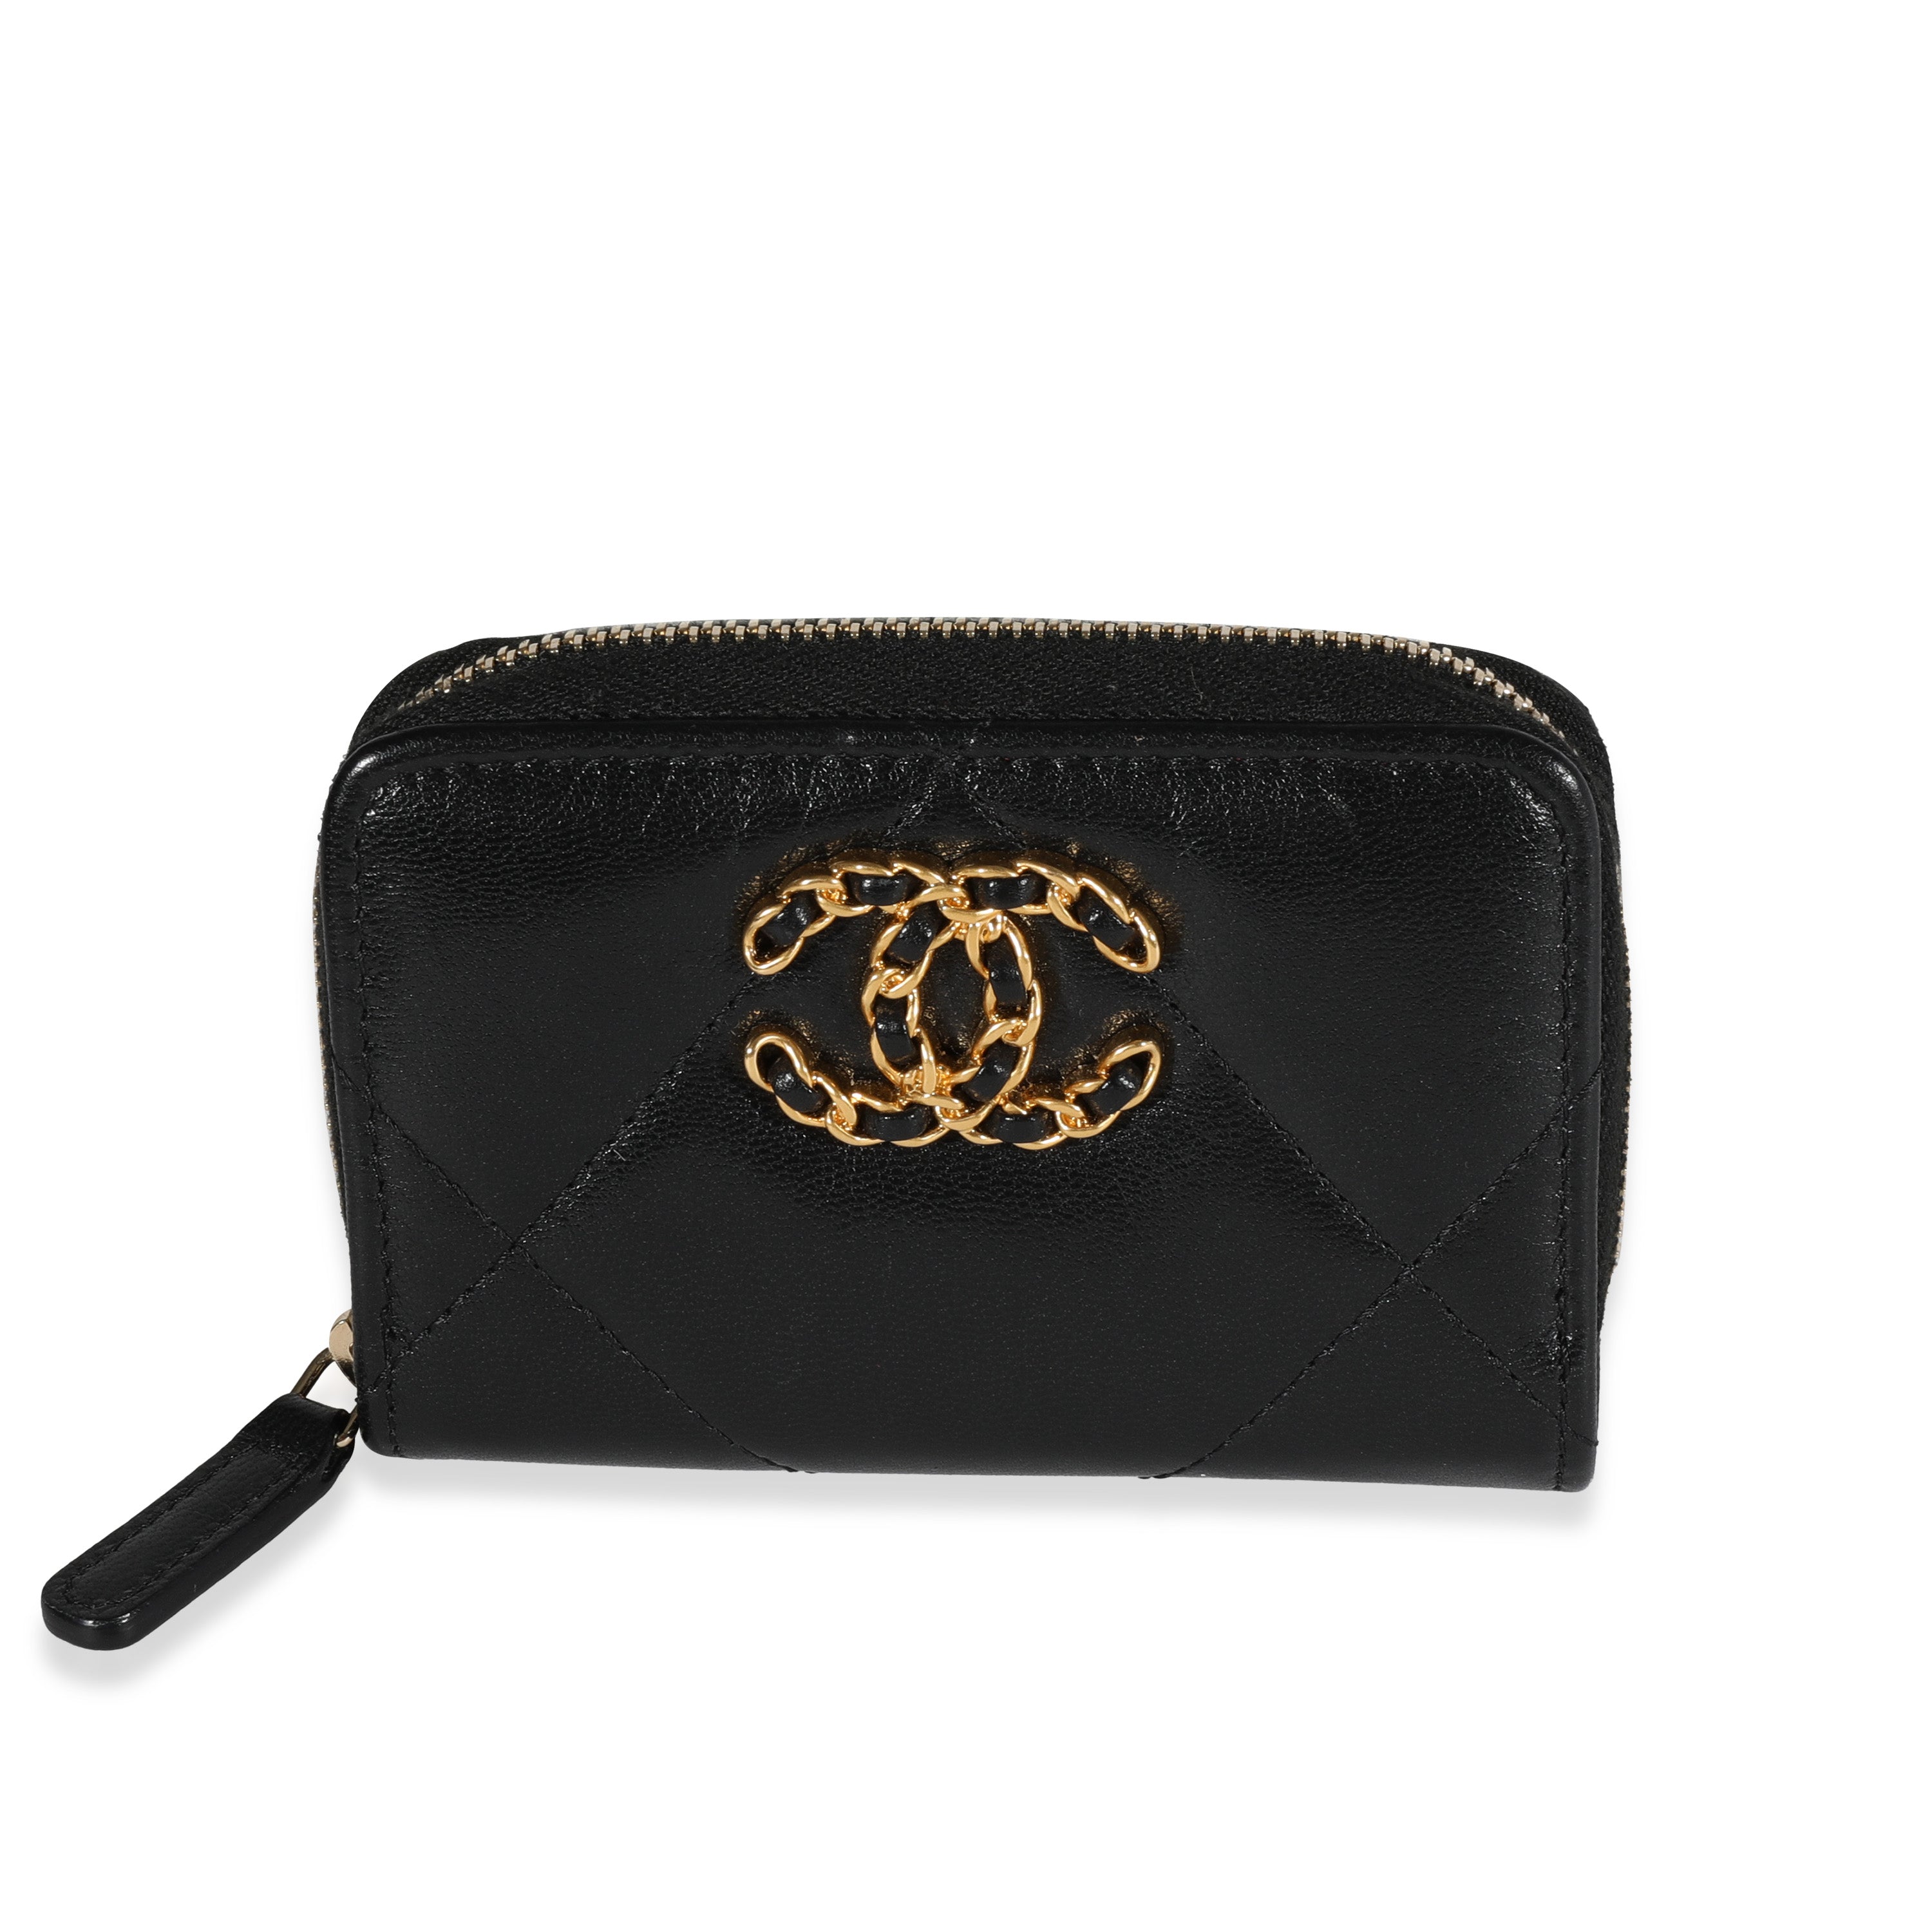 Chanel Chanel 19 Coin Purse Flap